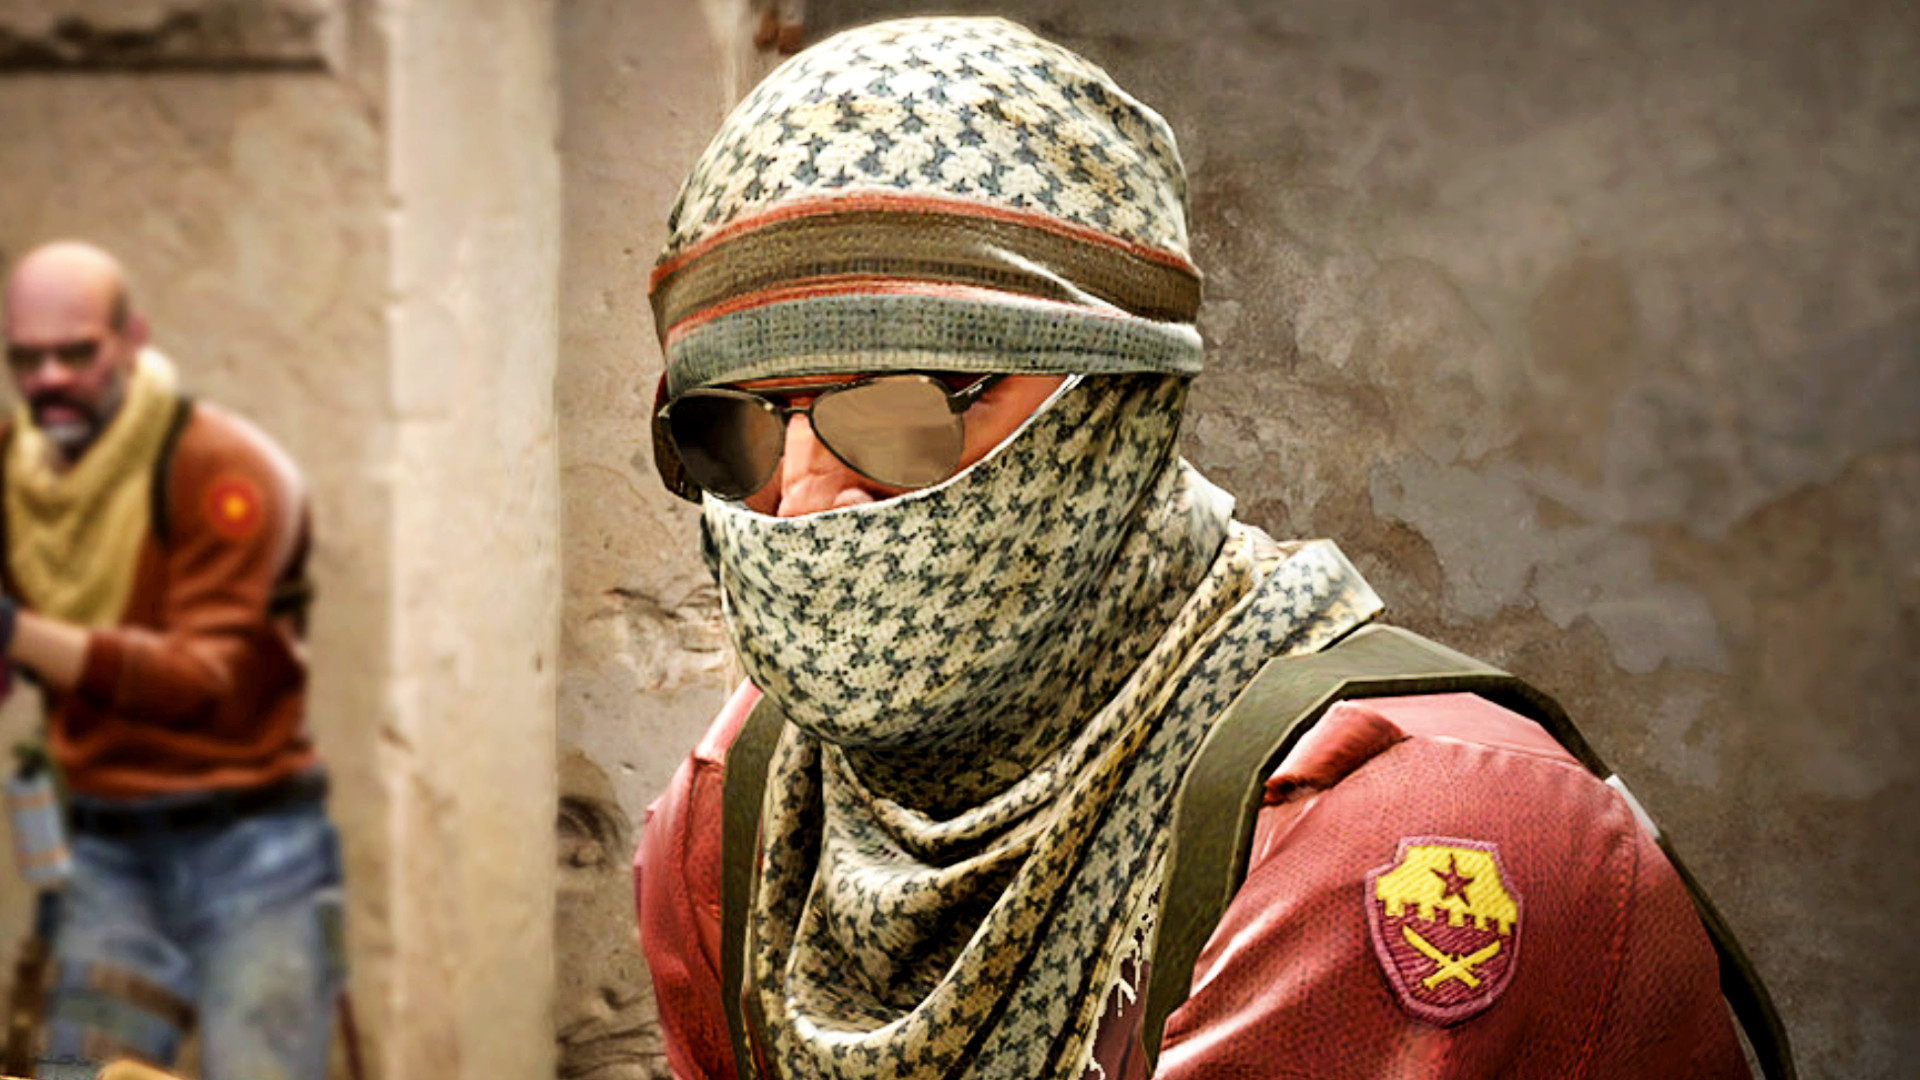 Counter Strike: Global Offensive breaks another record on Steam